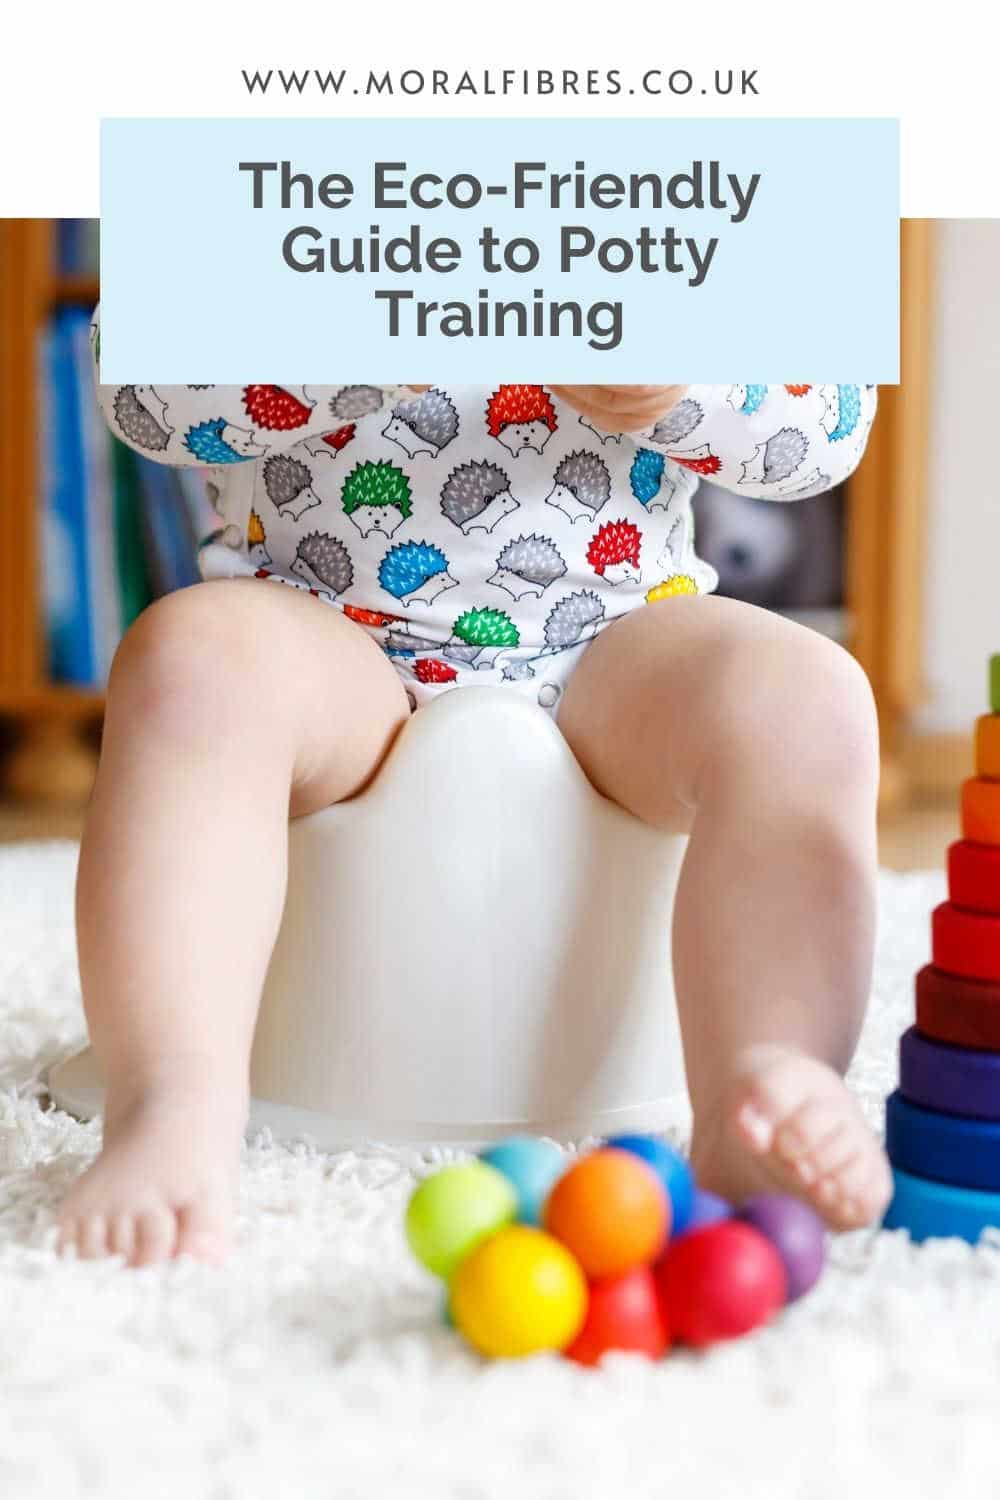 The ultimate eco-friendly guide to potty training.